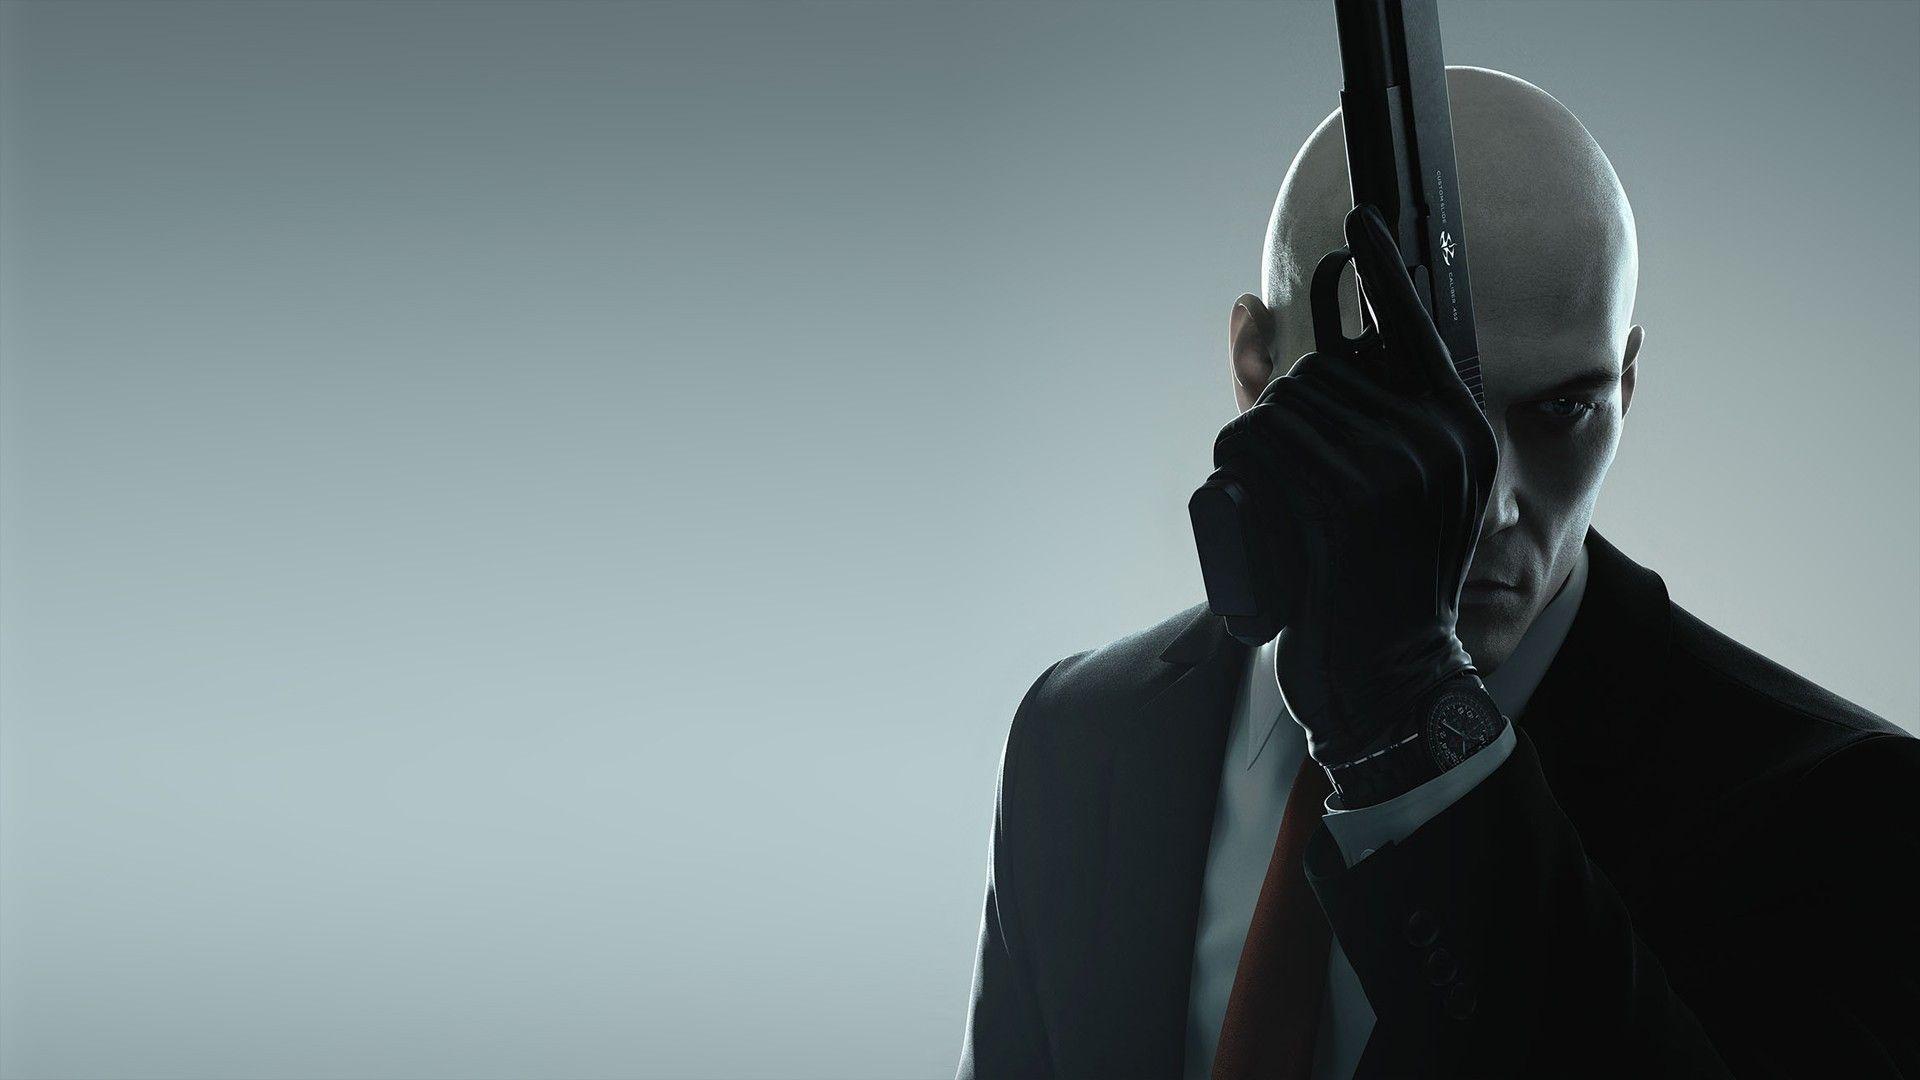 Hitman 2016 Wallpaper Image Photo Picture Background